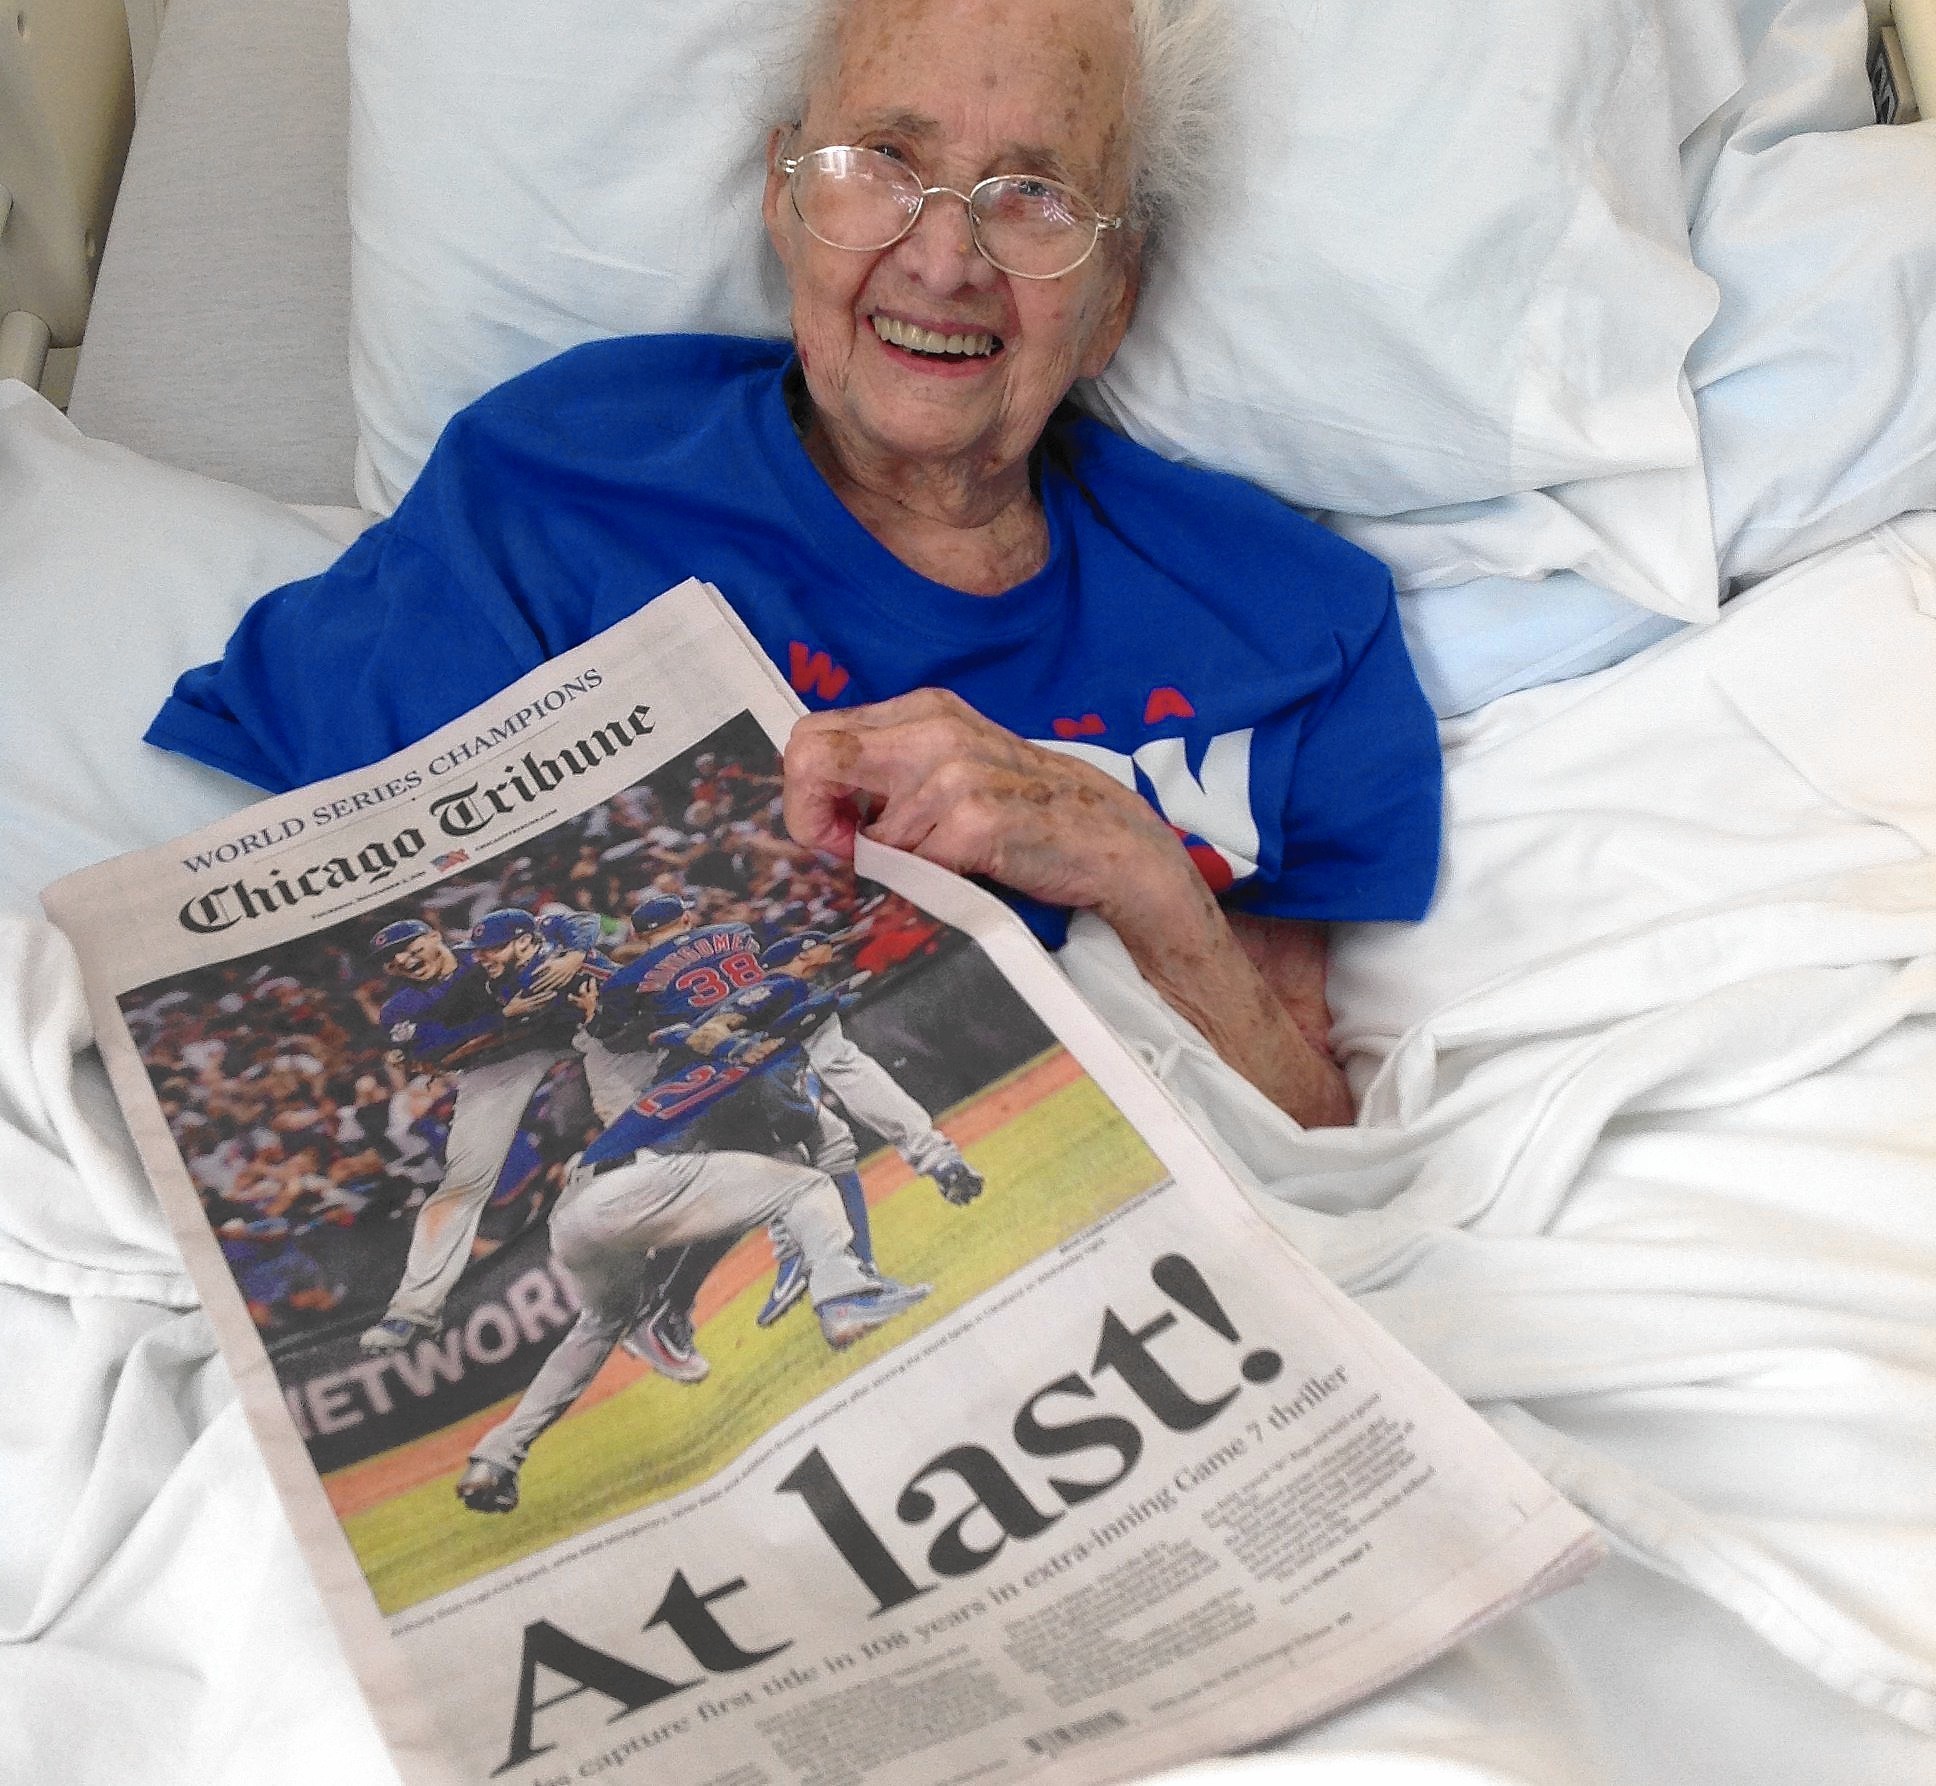 ct-nbs-108-year-old-cubs-fan-dies-tl-1117-20161110